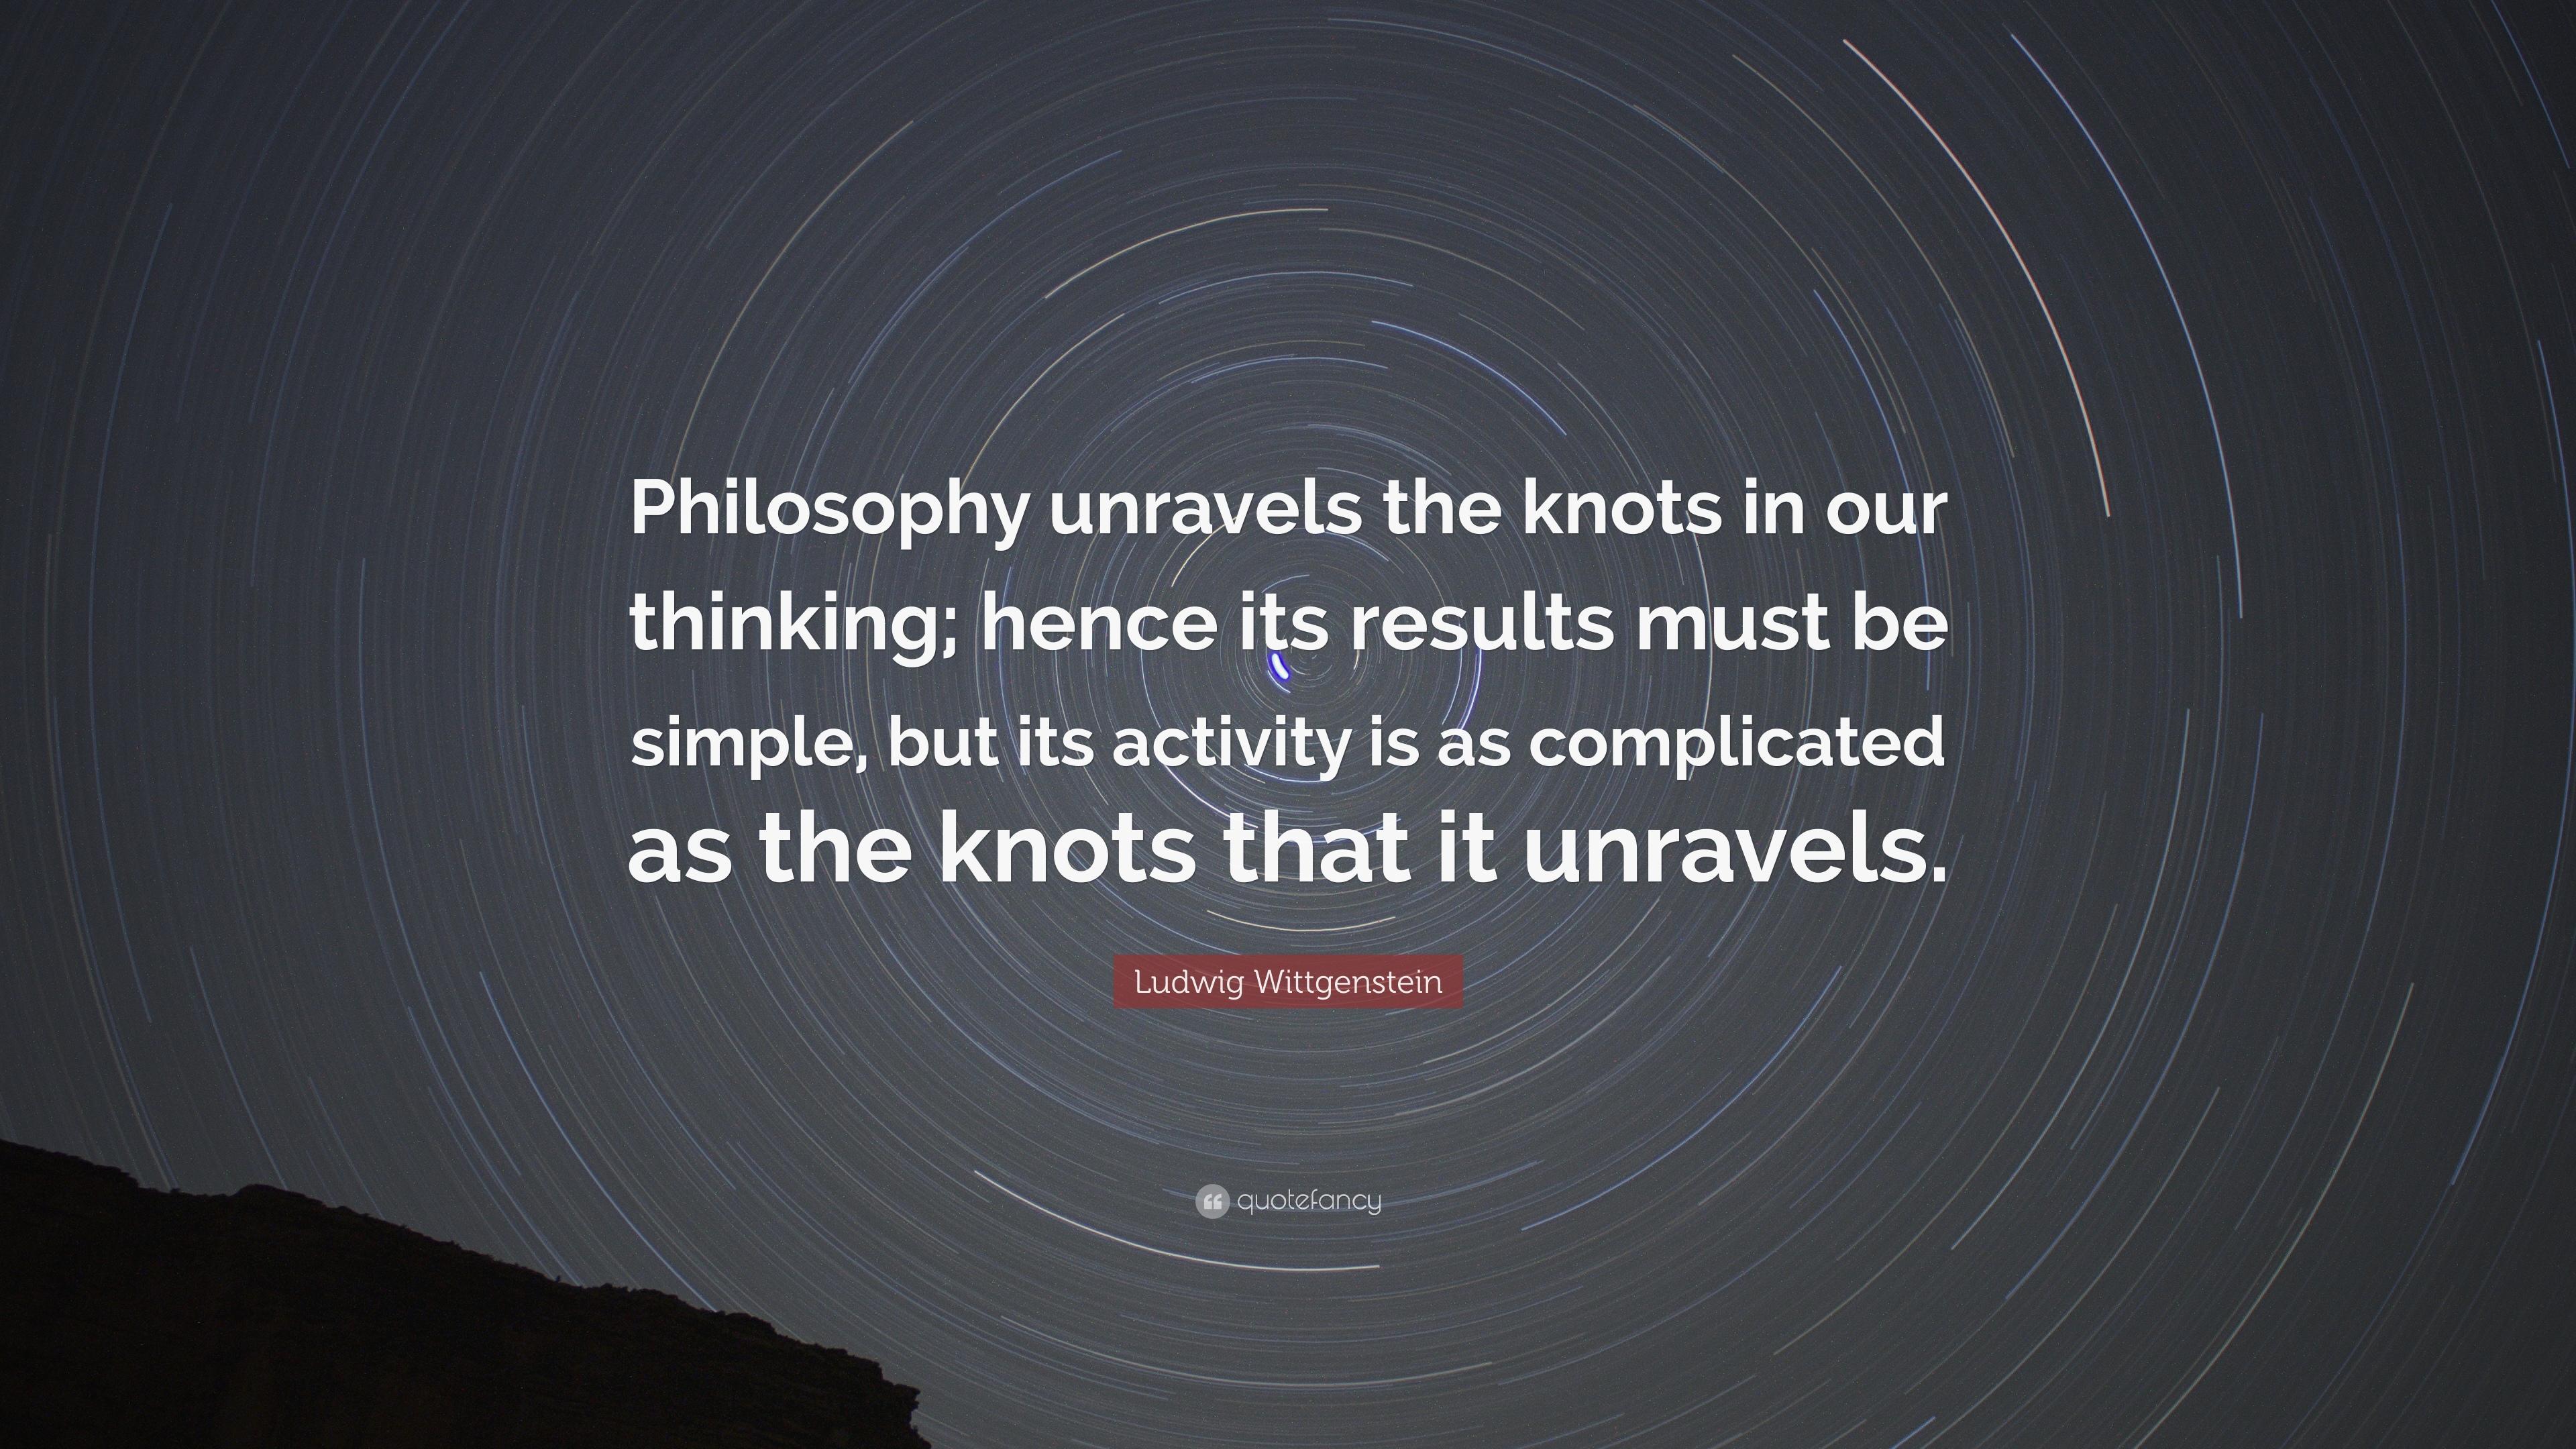 Ludwig Wittgenstein Quote: “Philosophy unravels the knots